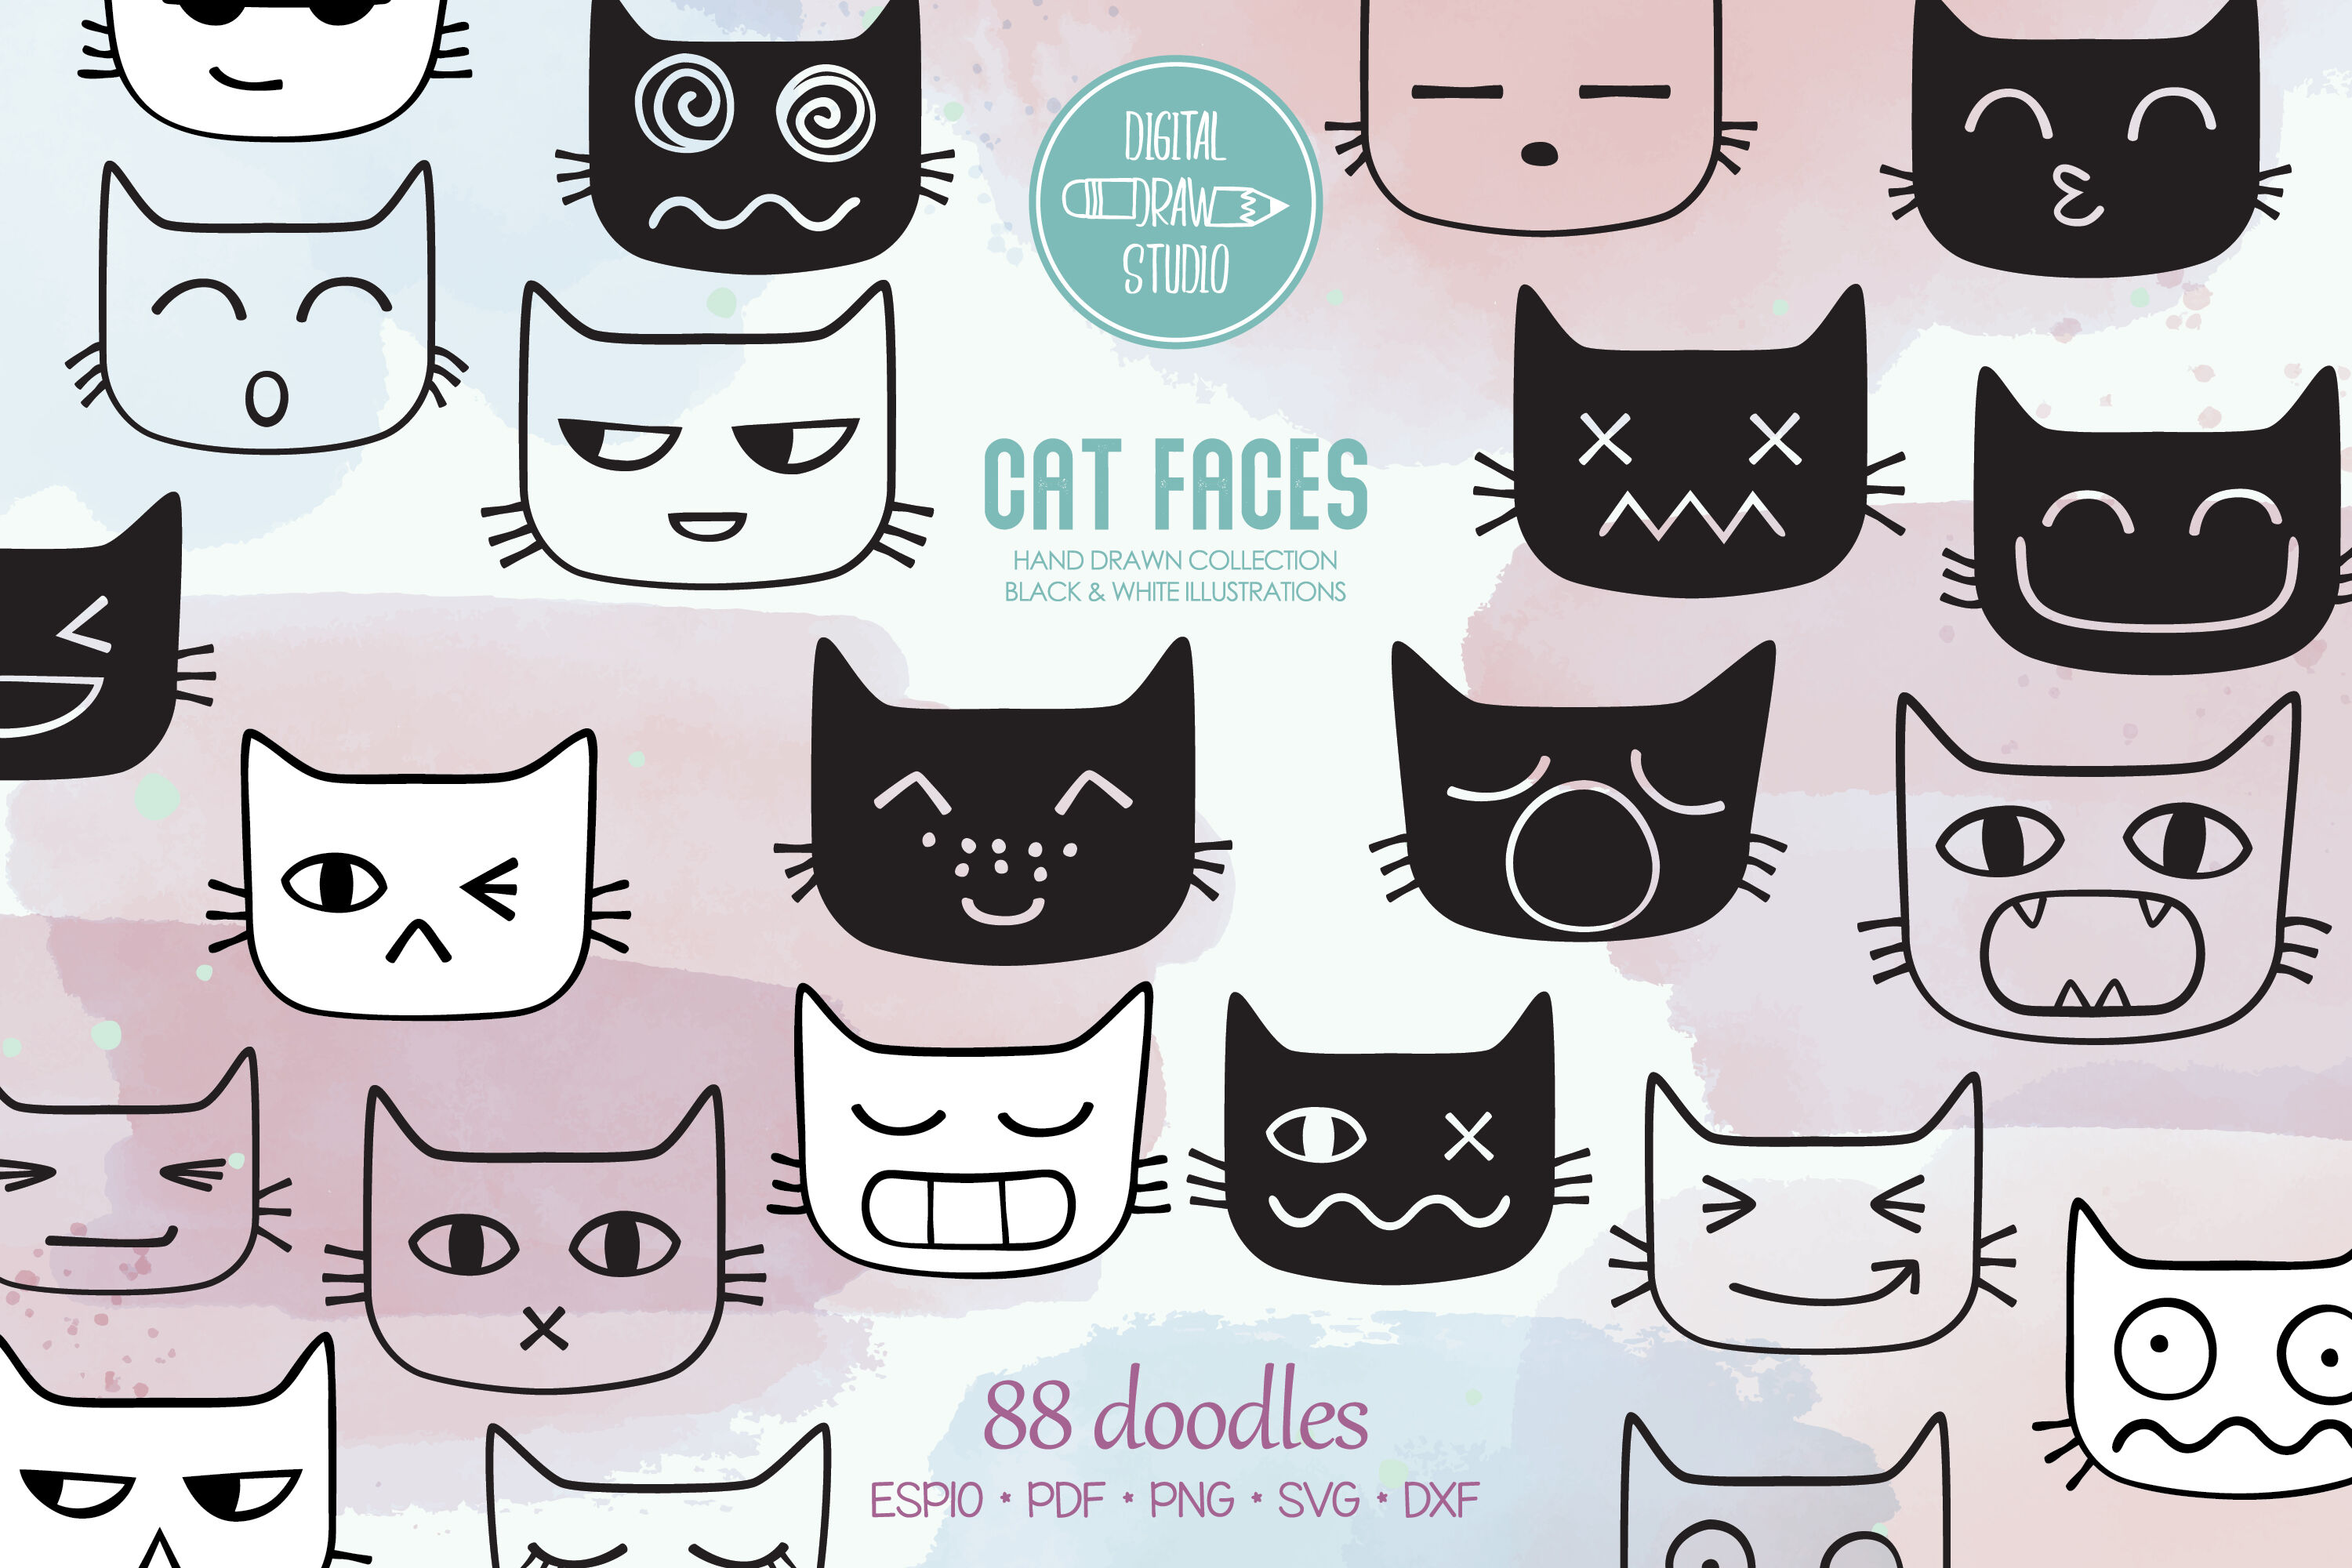 Cute funny cats set various emotions. Kawaii style emoticon icon